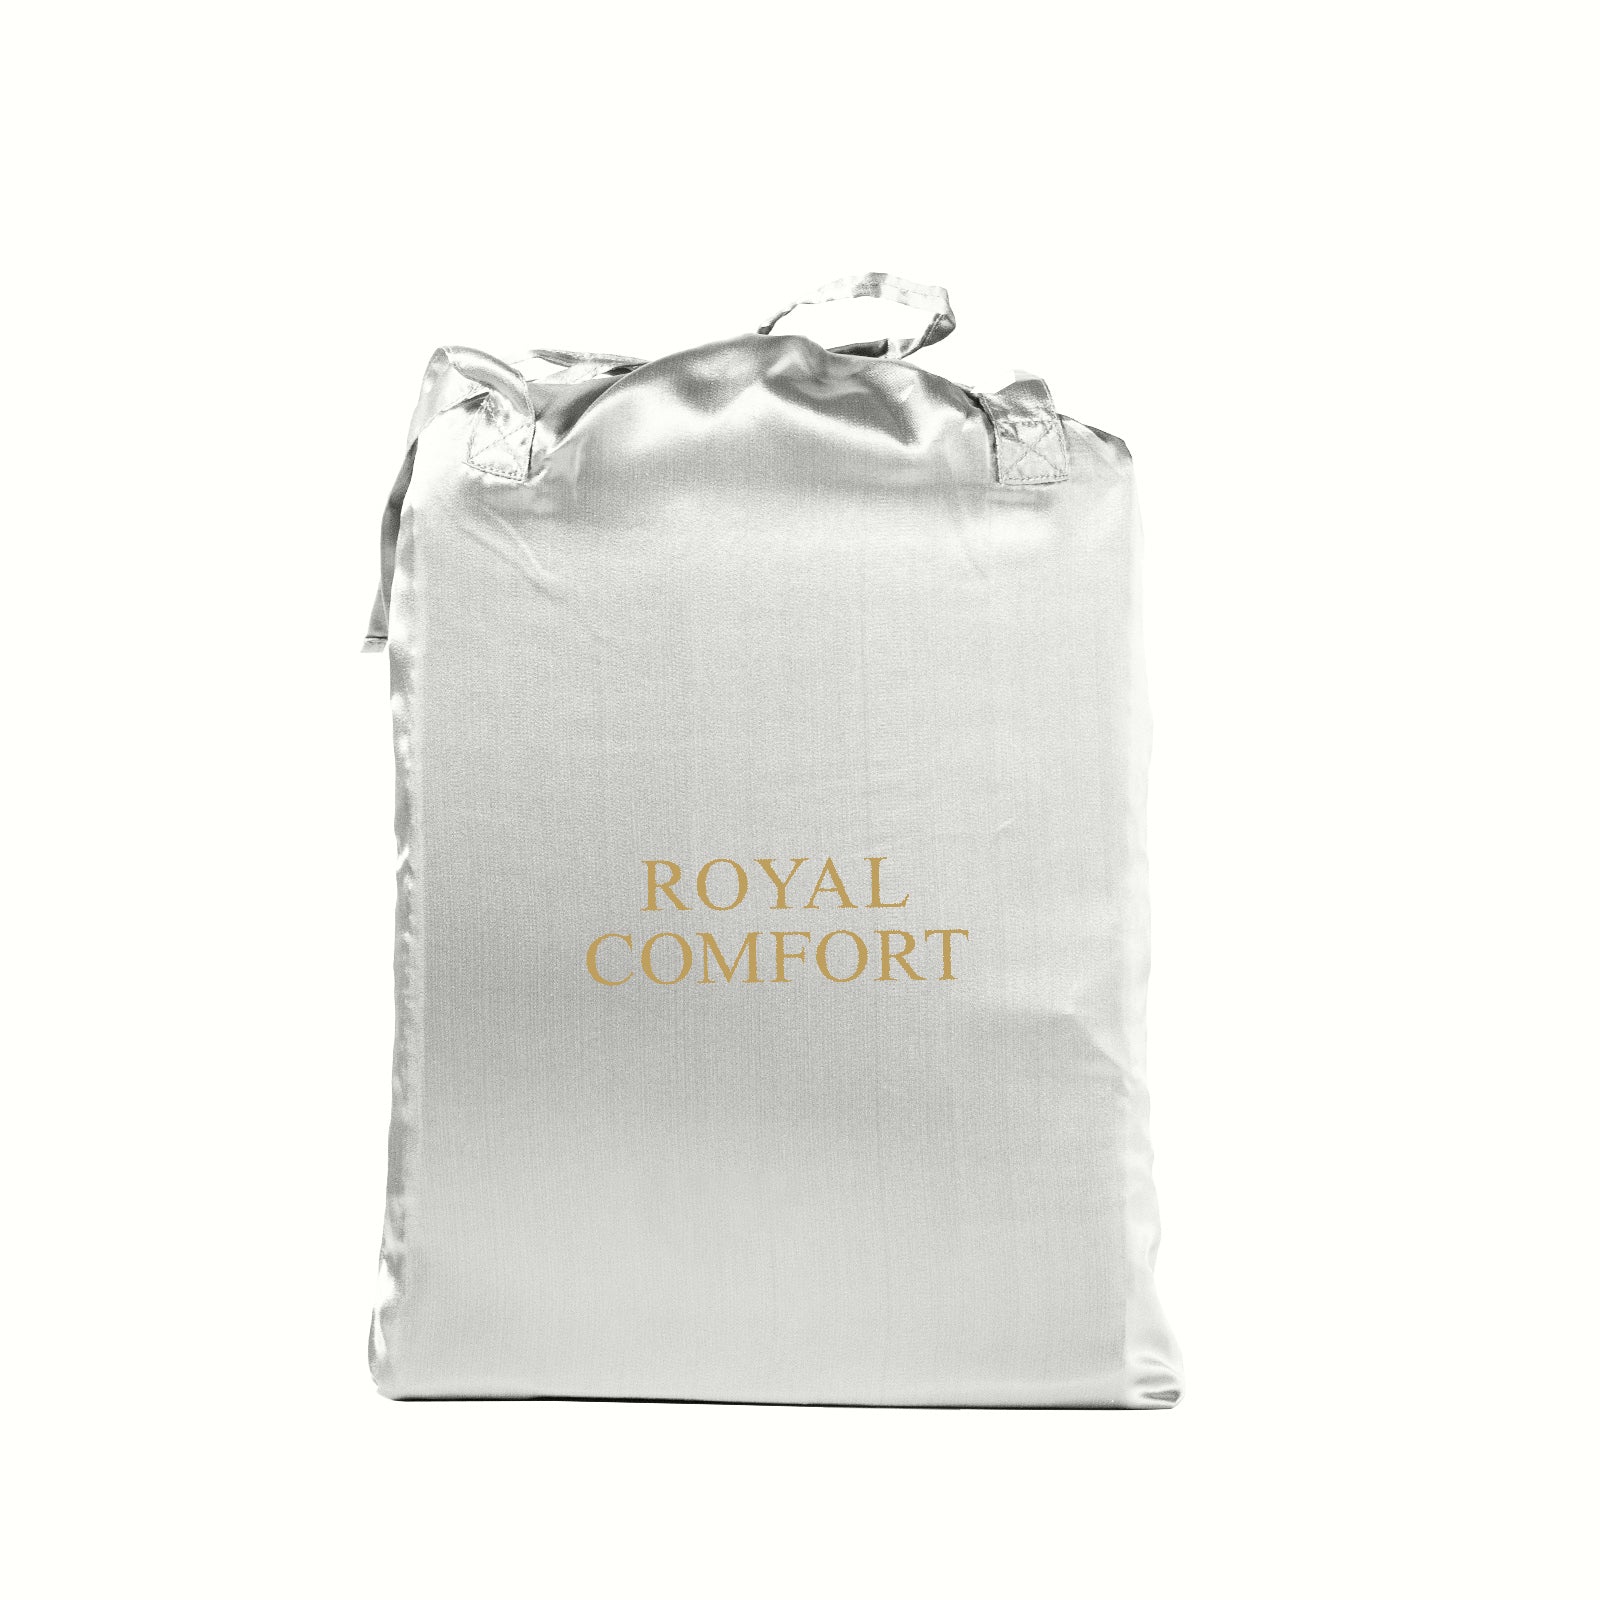 Royal Comfort Satin Sheet Set 3 Piece Fitted Sheet Pillowcase Soft Silky Smooth-Bed Linen-PEROZ Accessories